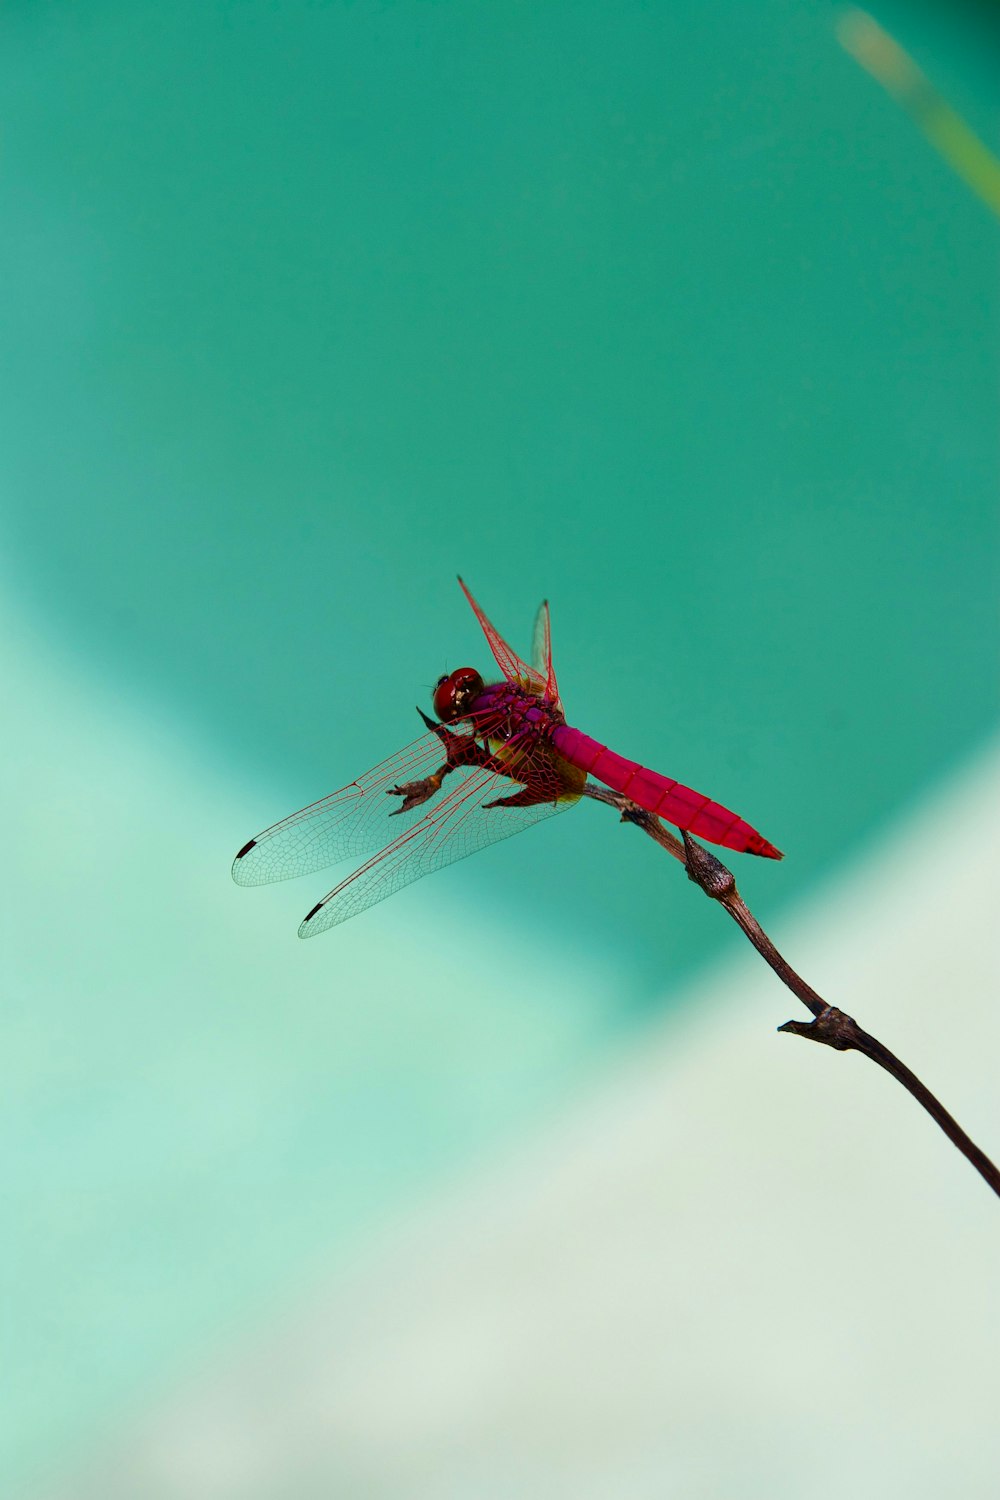 red dragonfly perched on brown stem in close up photography during daytime